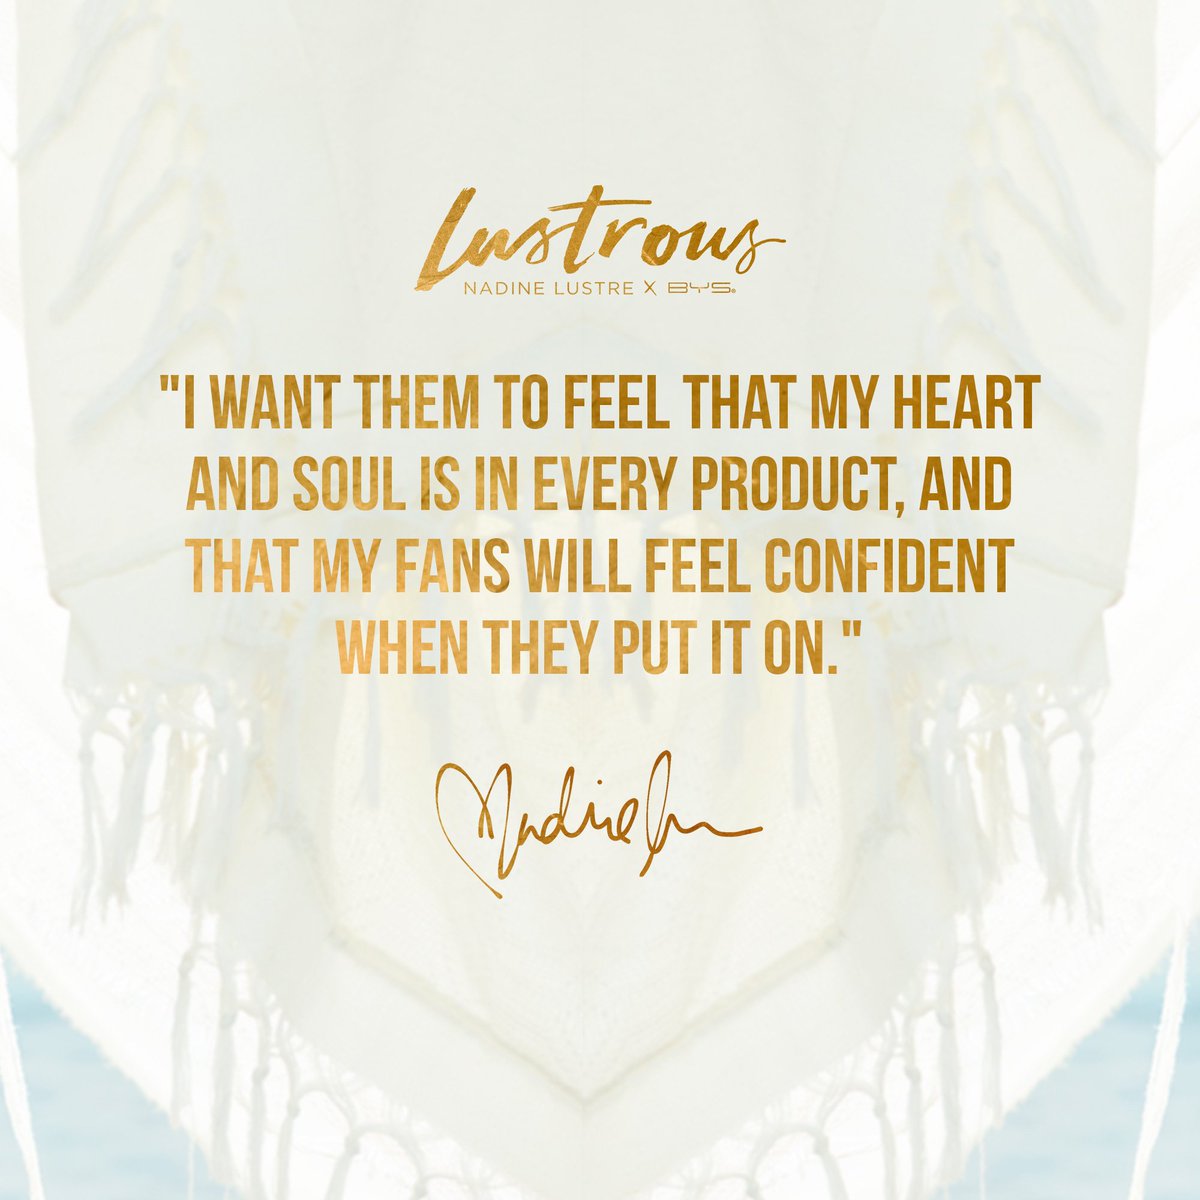 With Lustrous, Nadine and BYS Philippines have created a collection that gleams with passion — specially crafted to bring out your most confident beauty looks. #NadinexBYS #LustrousPH #NadineLustre #BYSPhilippines